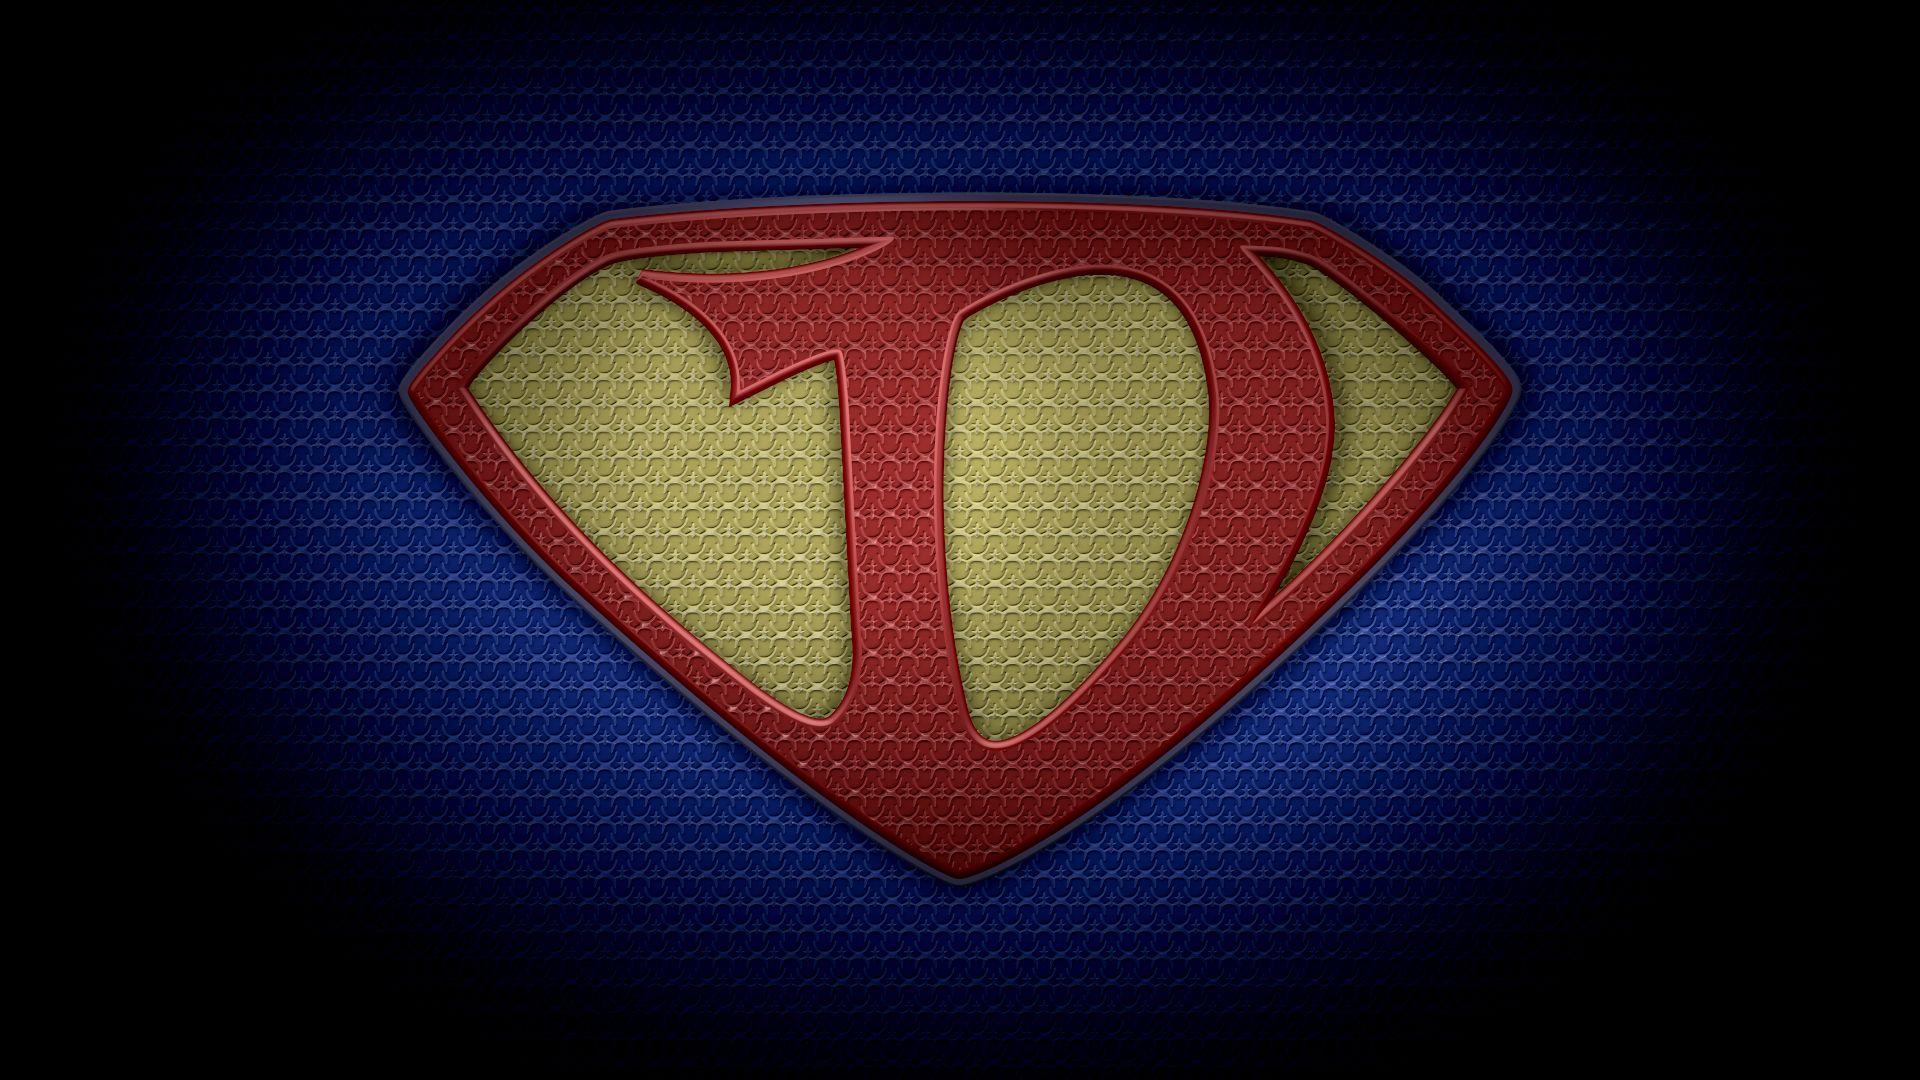 The letter D in the style of “Man of Steel”